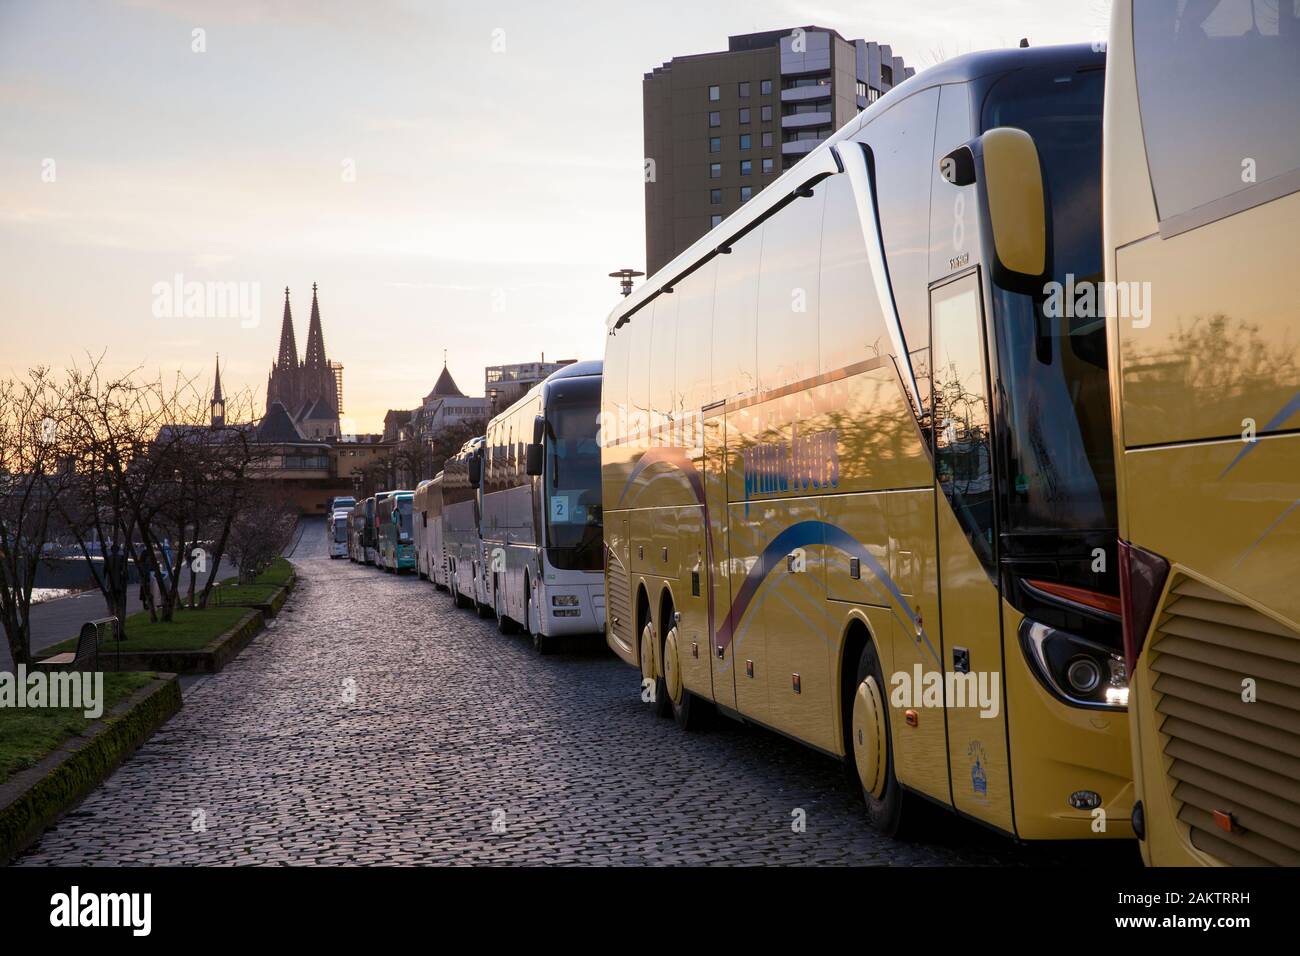 coaches park in long rows at the street Konrad-Adenauer-Ufer on the river Rhine, the cathedral, Cologne, Germany.  Reisebusse parken in langen Schlang Stock Photo